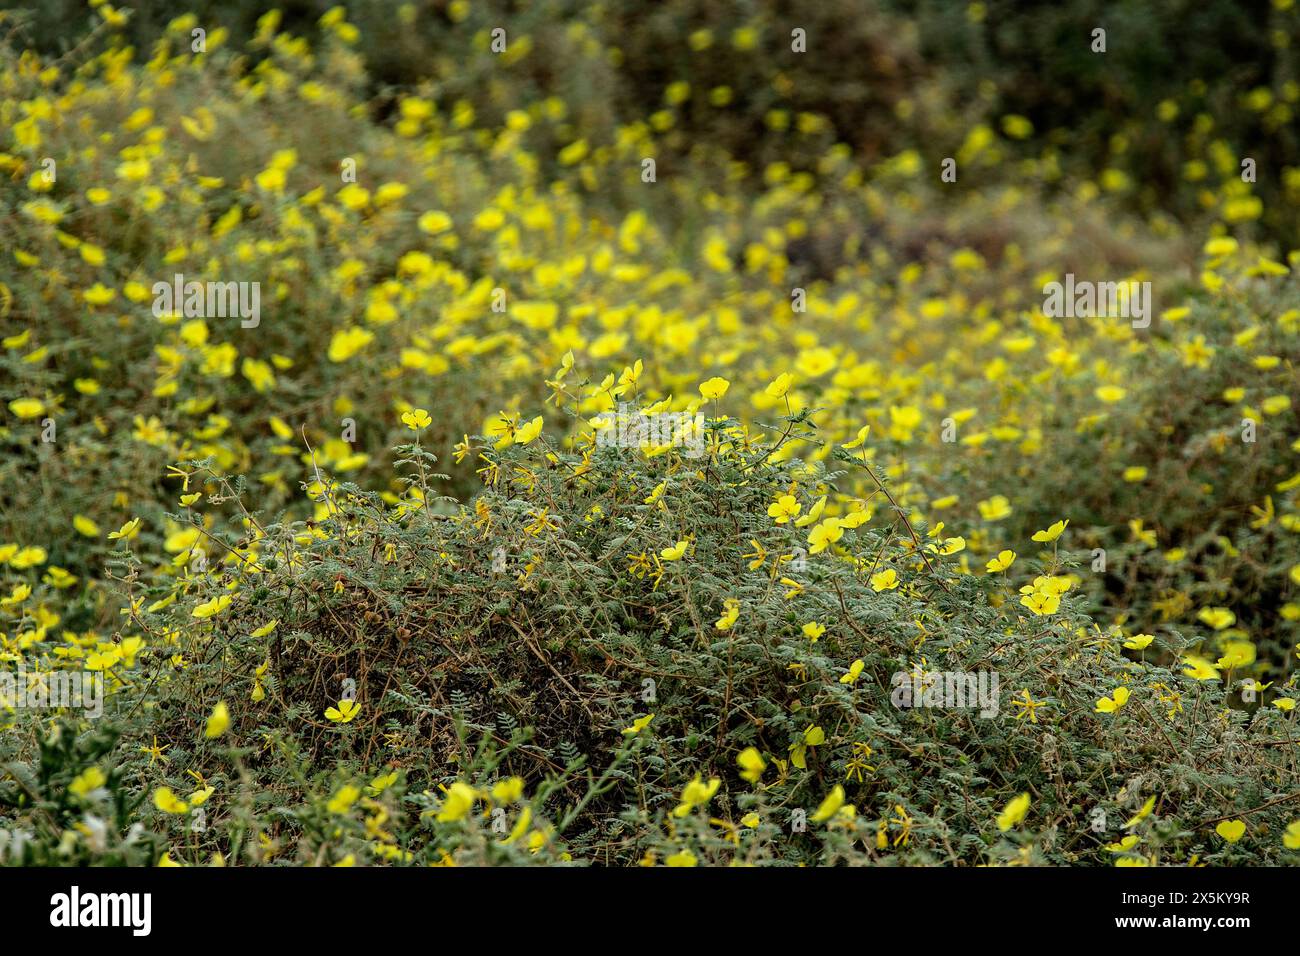 A bright yellow swathe of tribulus out in the Namib desert following the early rains. Stock Photo